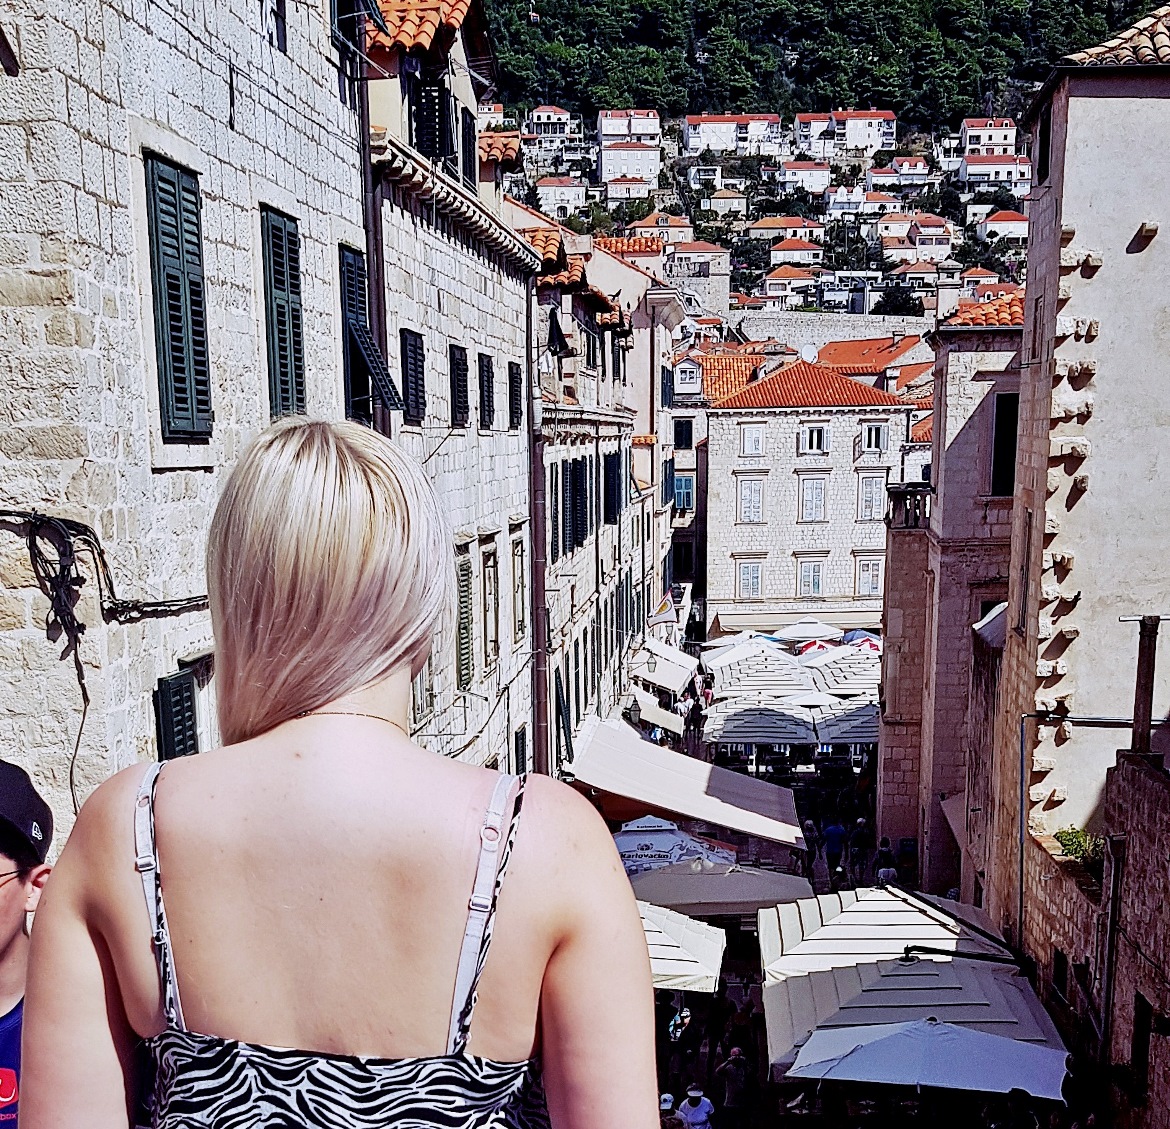 The Shame Steps from Game of Thrones - Sightseeing in Dubrovnik, Croatia - Top Travel Tips by BeckyBecky Blogs